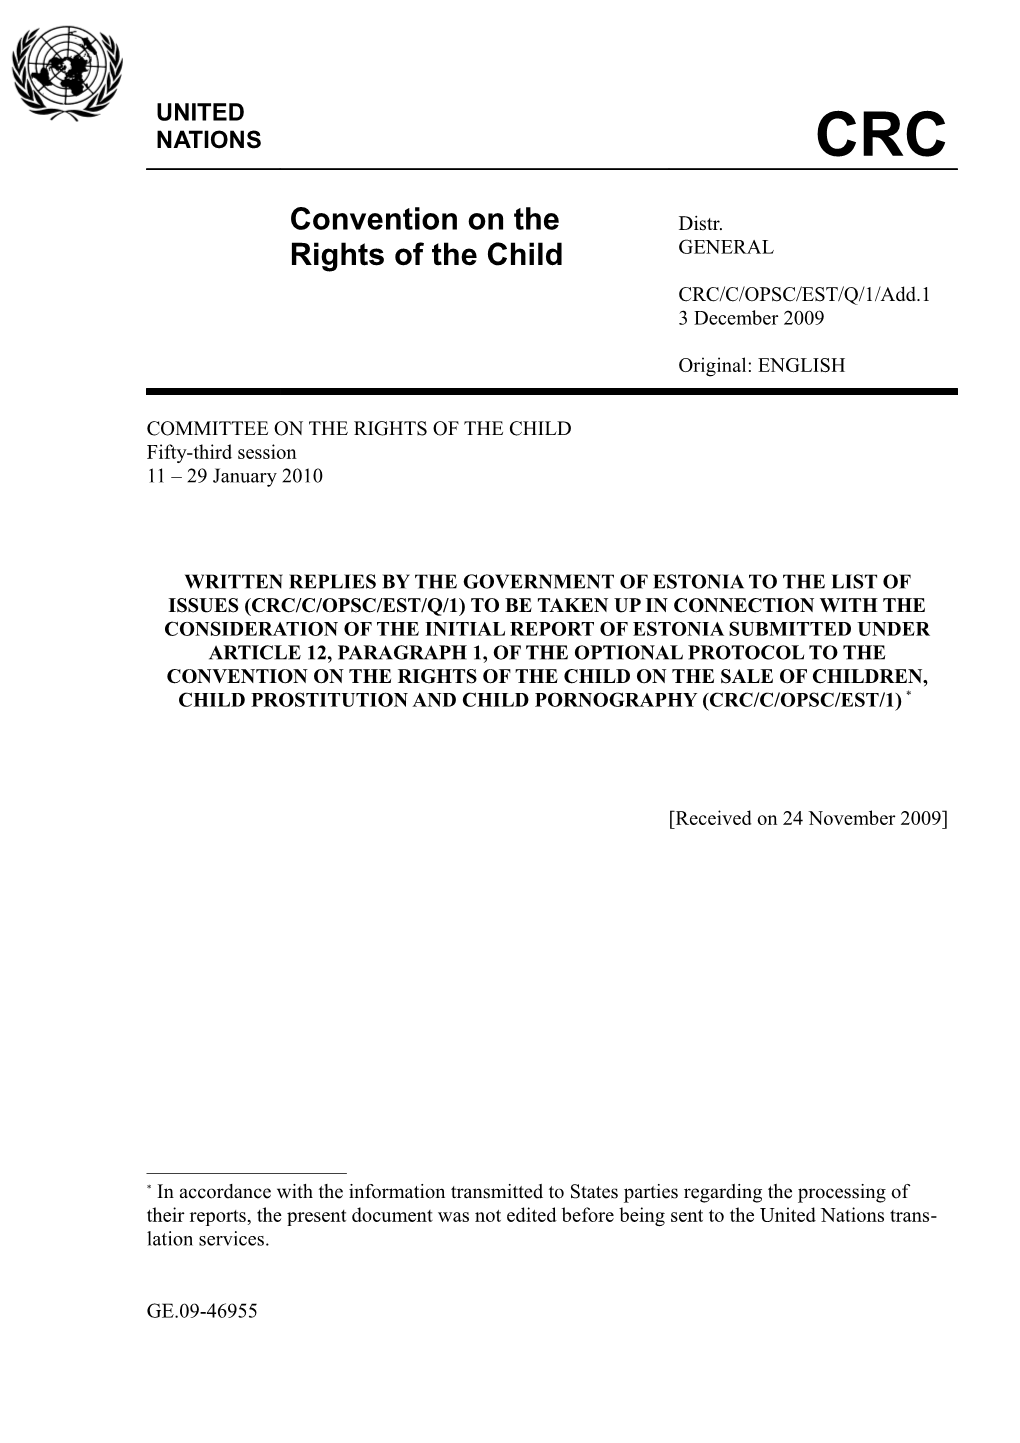 Optional Protocol on the Sale of Children, Child Prostitution and Child Pornography